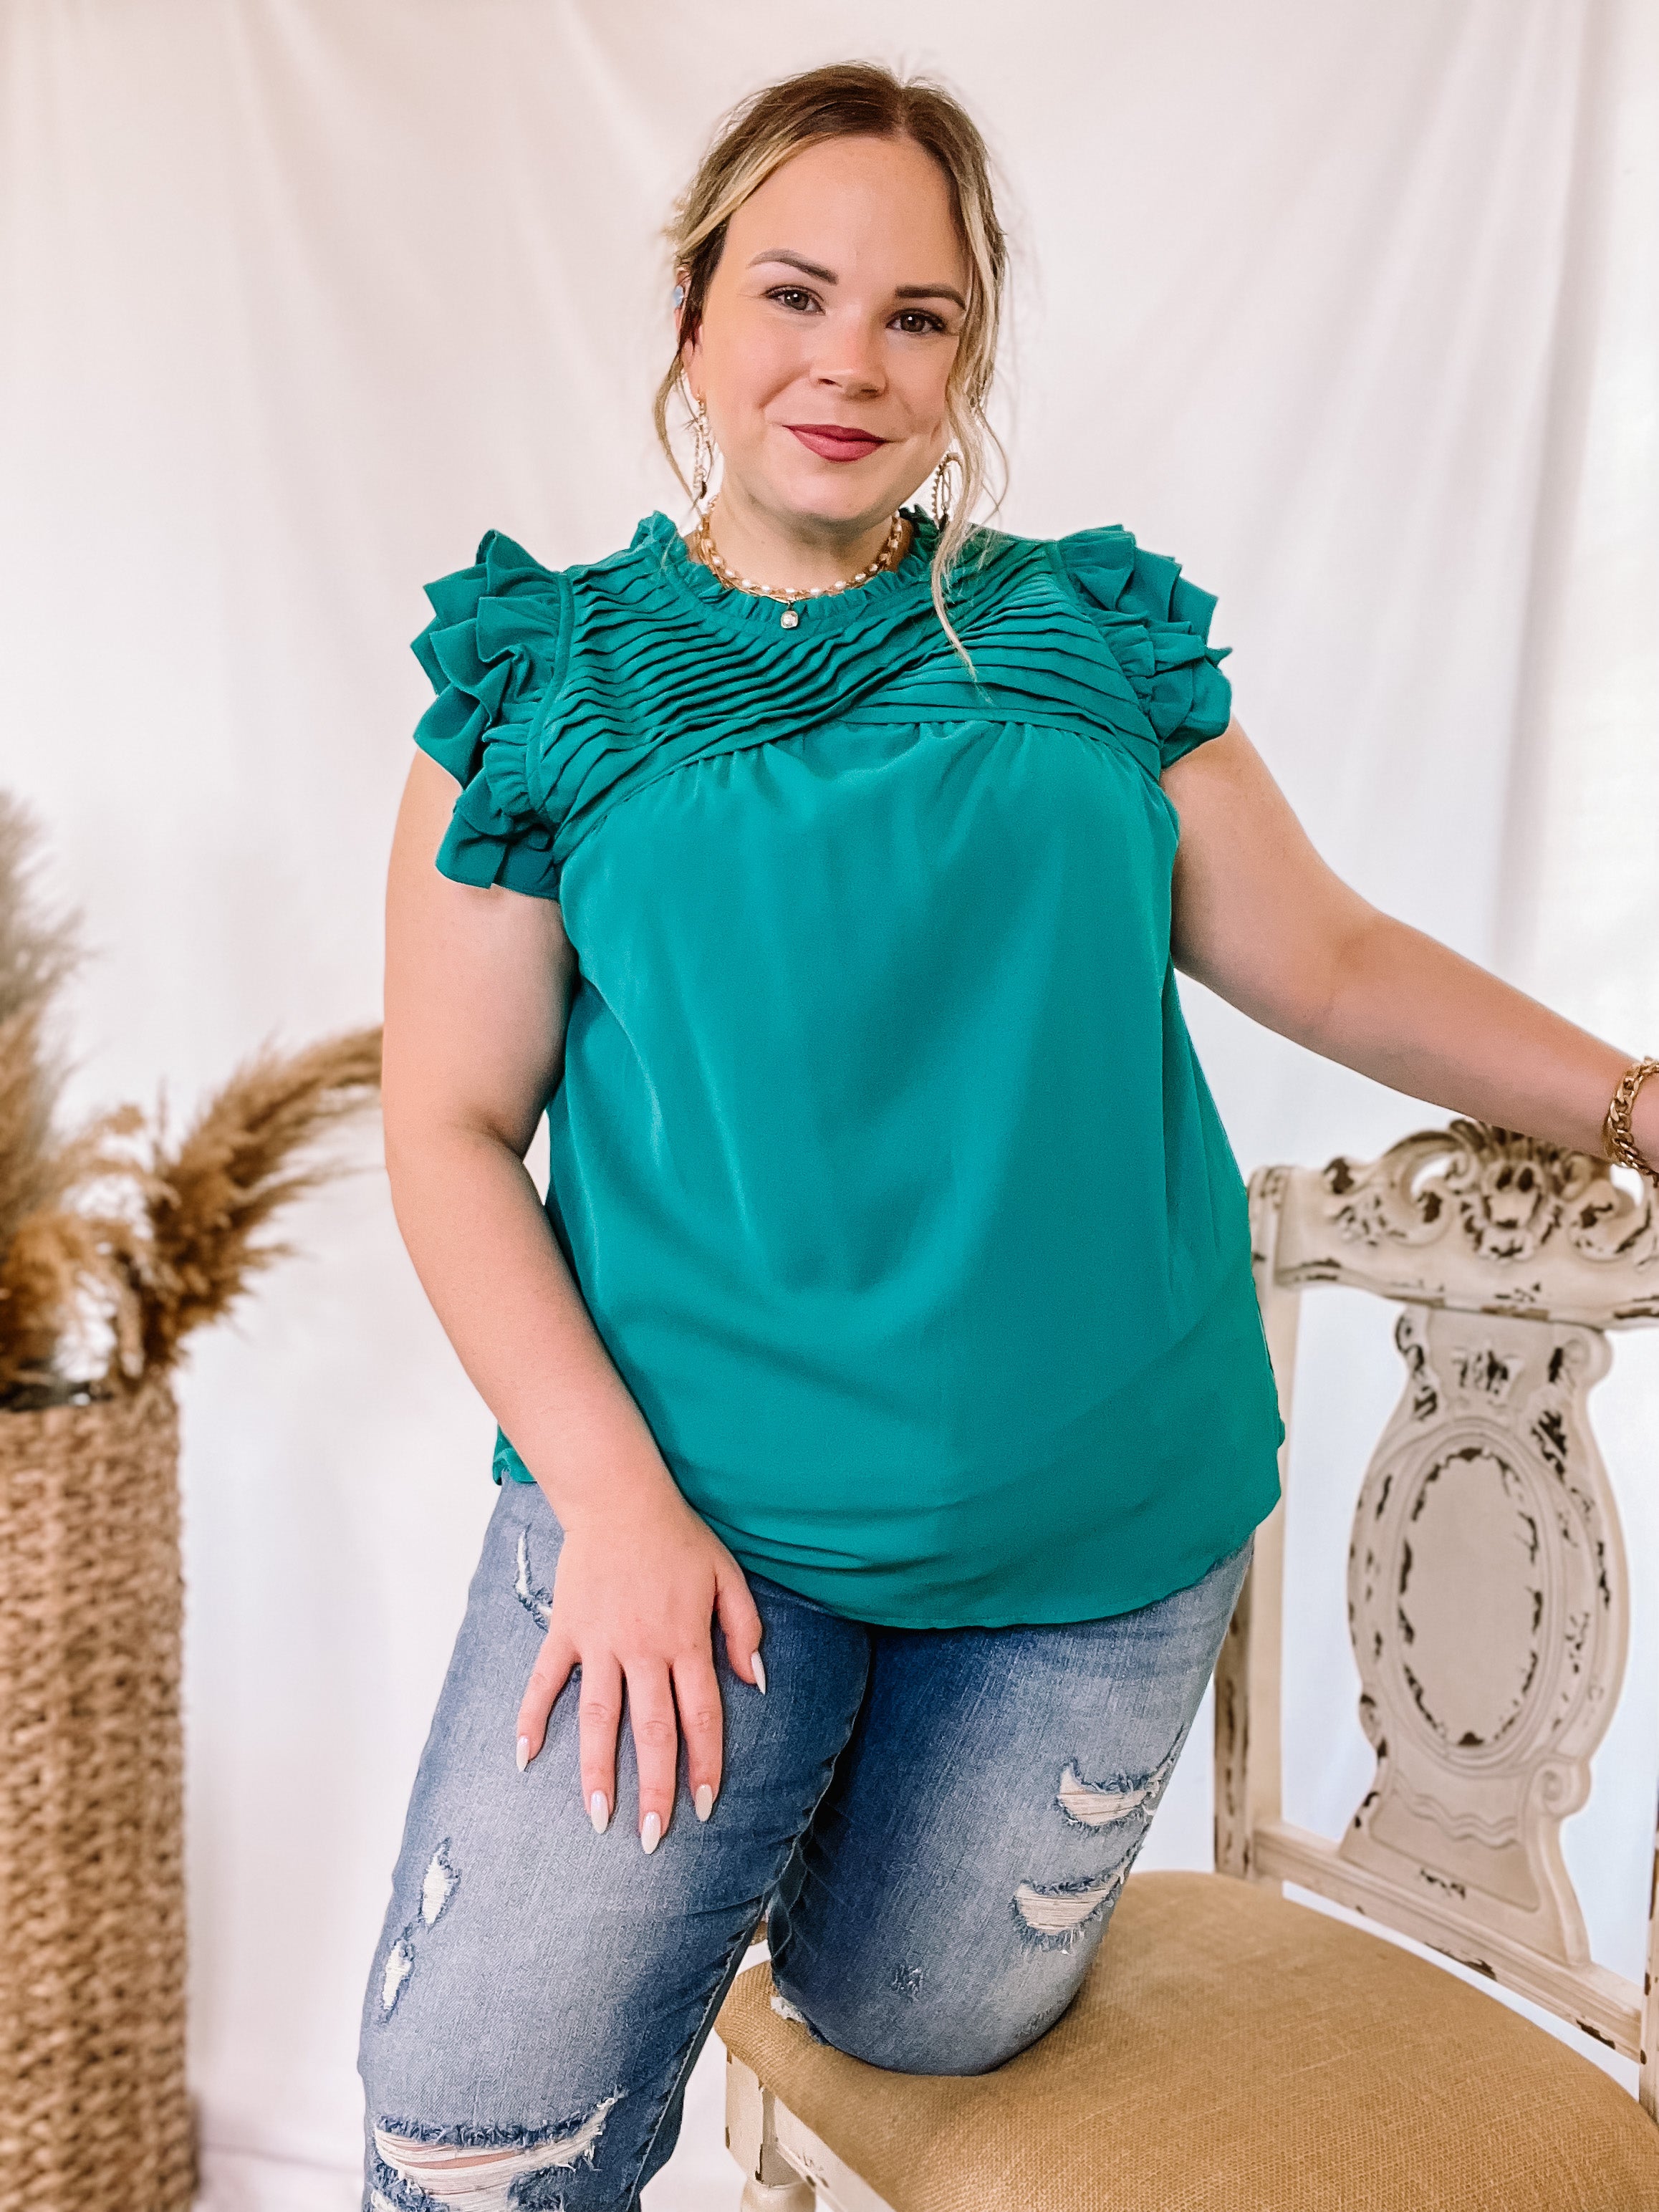 Expect The Best Pleated Upper Blouse with Ruffle Cap Sleeves in Teal Green - Giddy Up Glamour Boutique